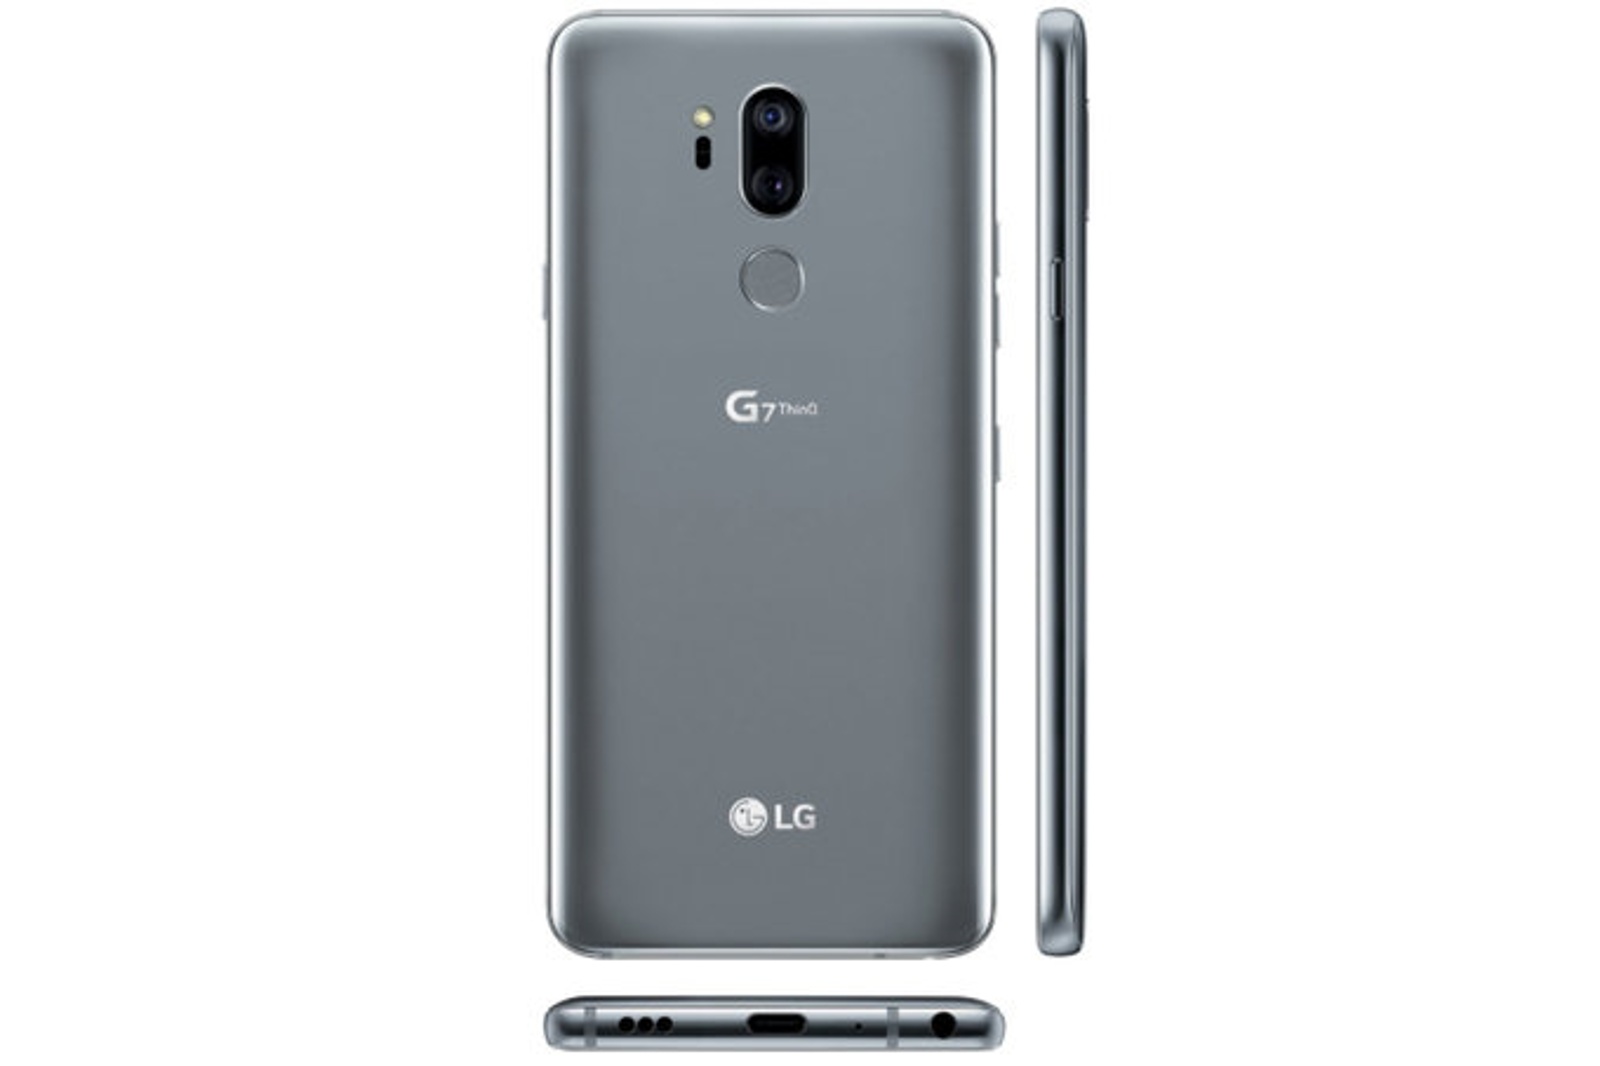 LG puts the focus on audio with the G7 ThinQ